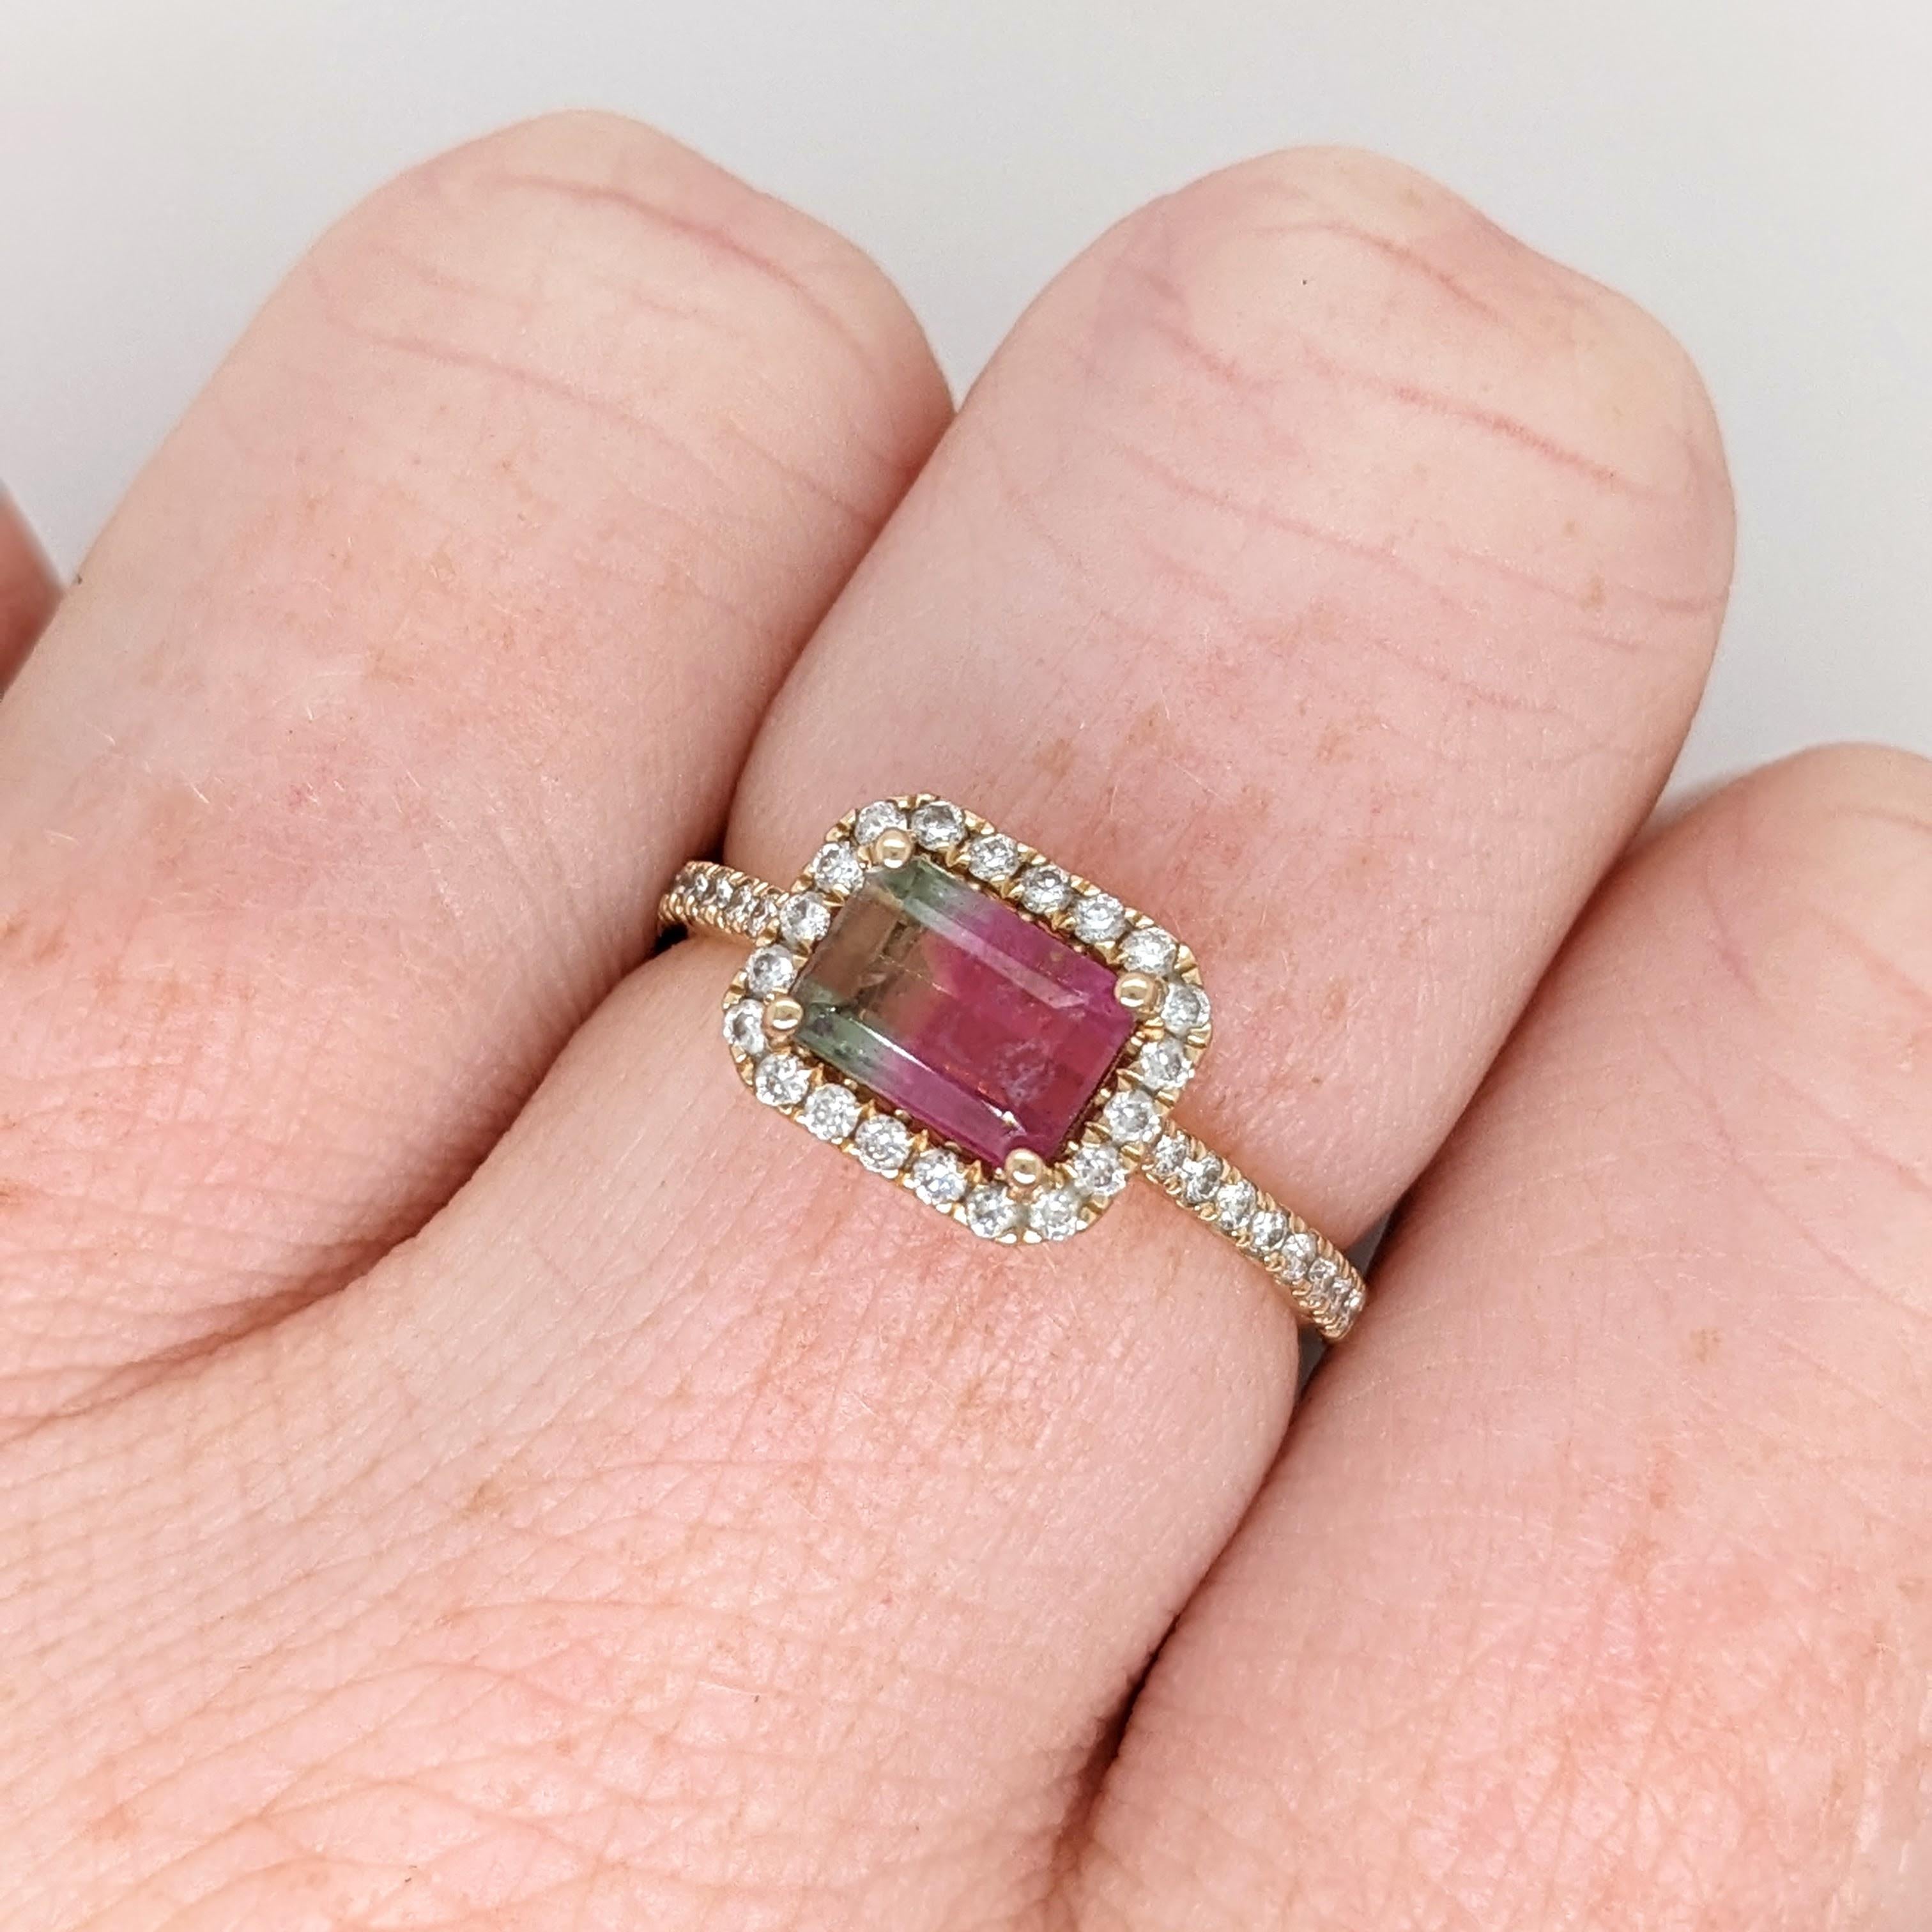 This ring features a beautiful emerald cut watermelon tourmaline in a classic NNJ Designs ring setting in 14k yellow gold. A gorgeous modern look that's perfectly balanced between minimalist and glamour. This ring also makes a beautiful October